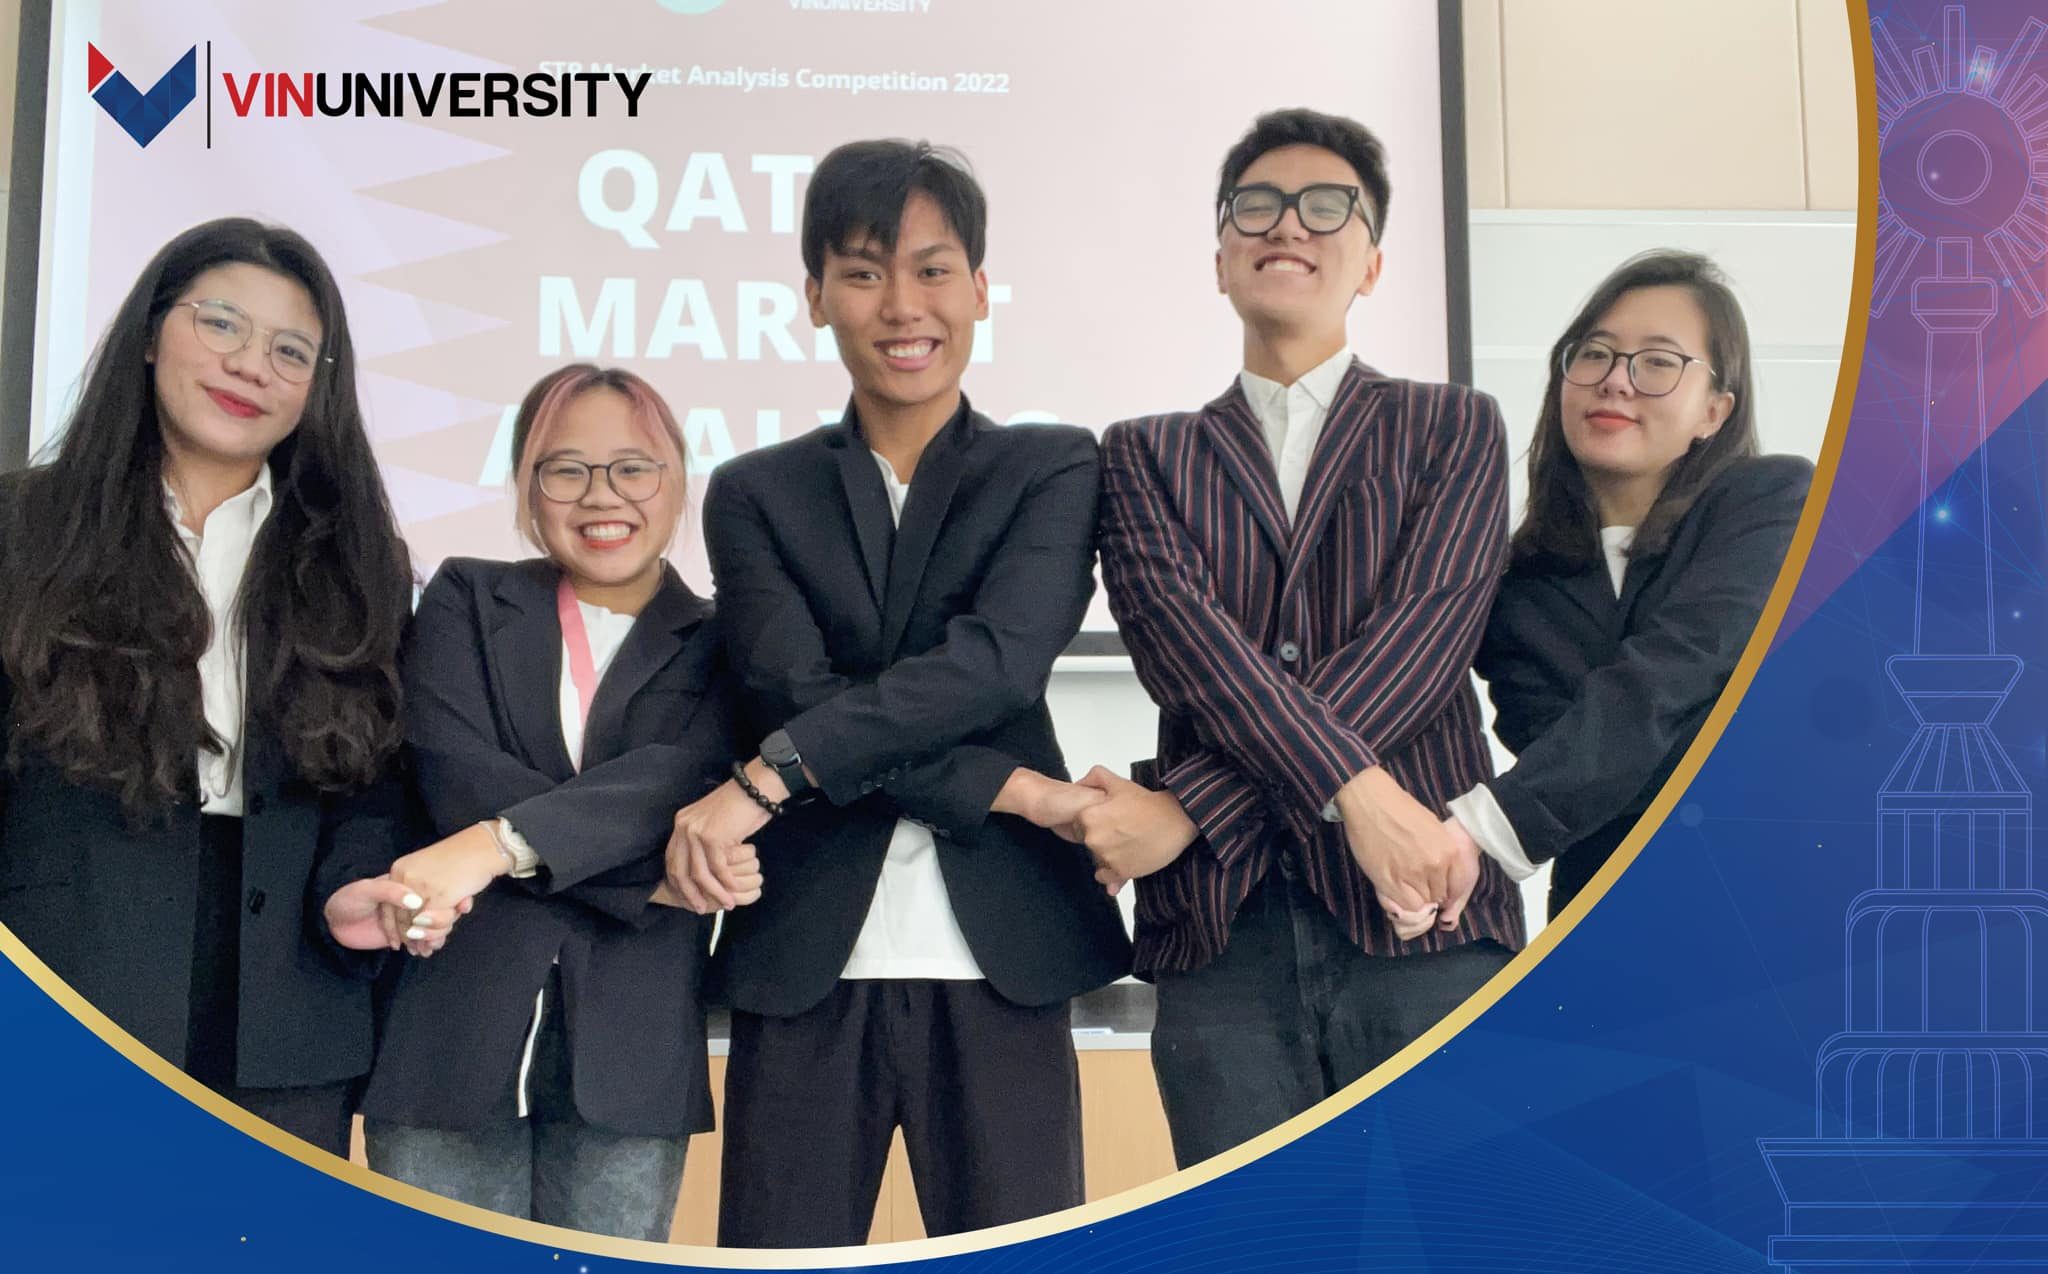 Congratulations to VinUniversity Students for Winning 2nd Prize in Asia-Pacific at the Virtual Student Market Competition